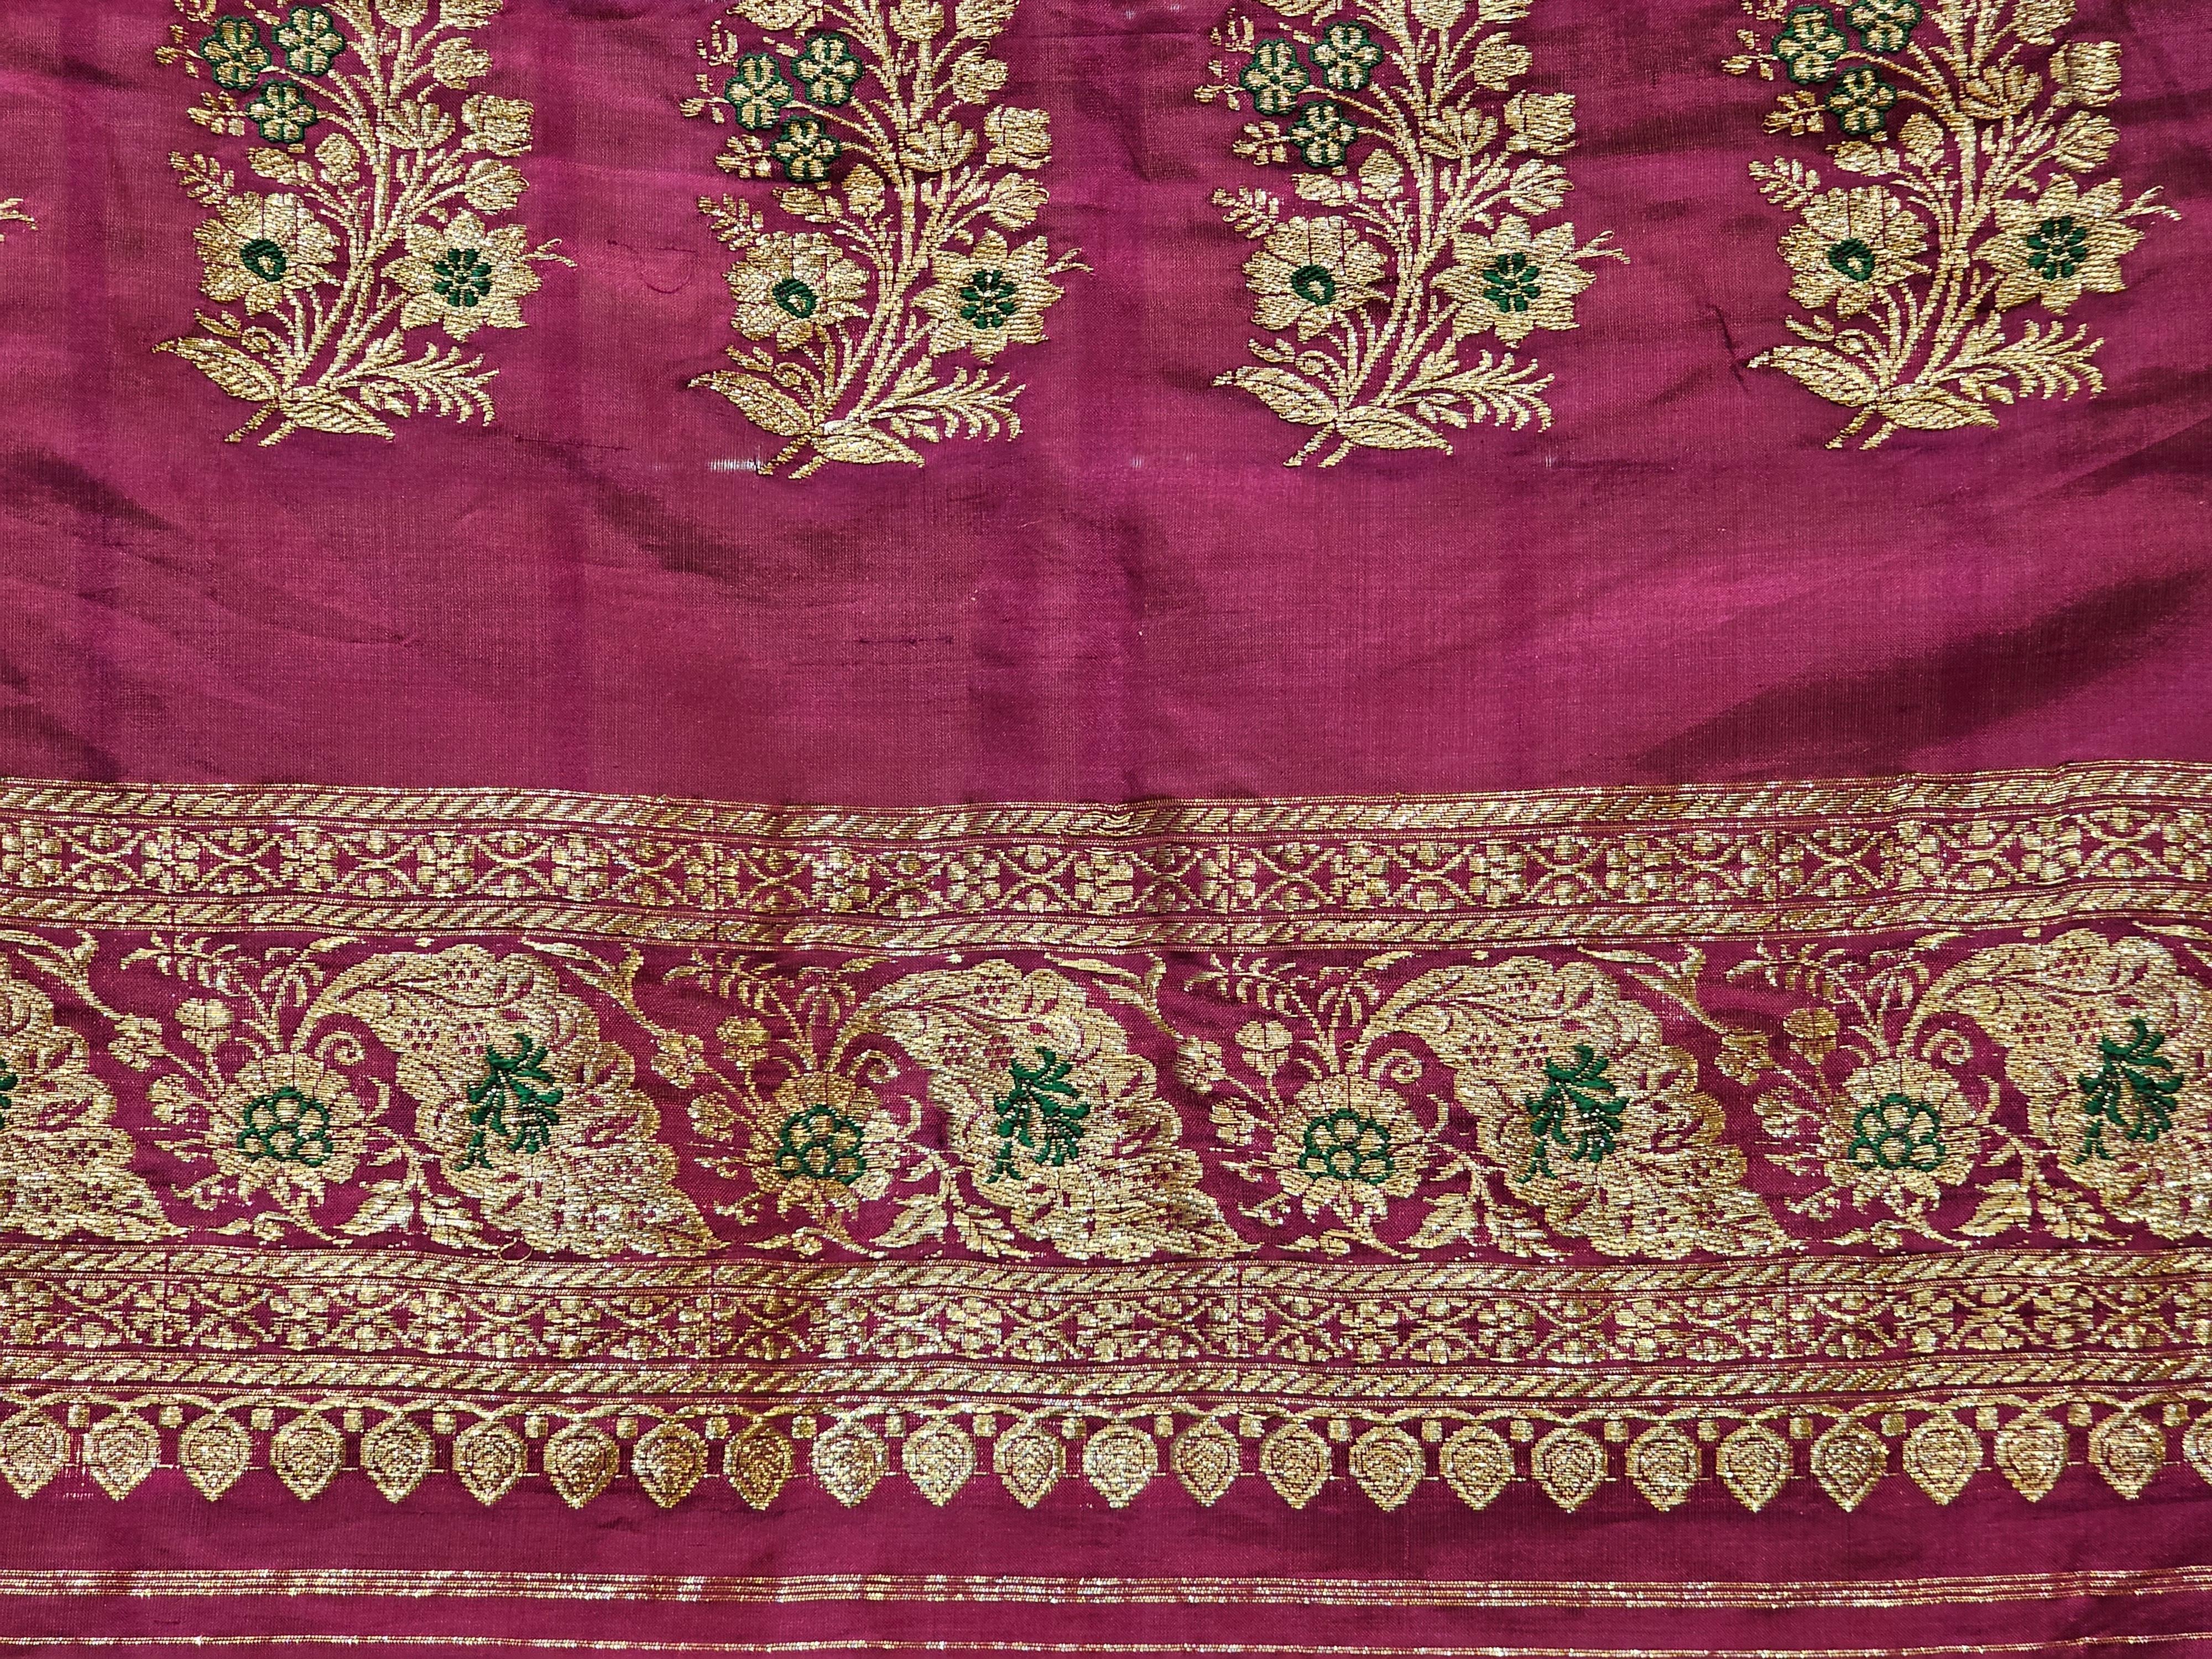 Vintage Brocade Silk Textile in Paisley Pattern in Burgundy, Turquoise, Gold For Sale 2